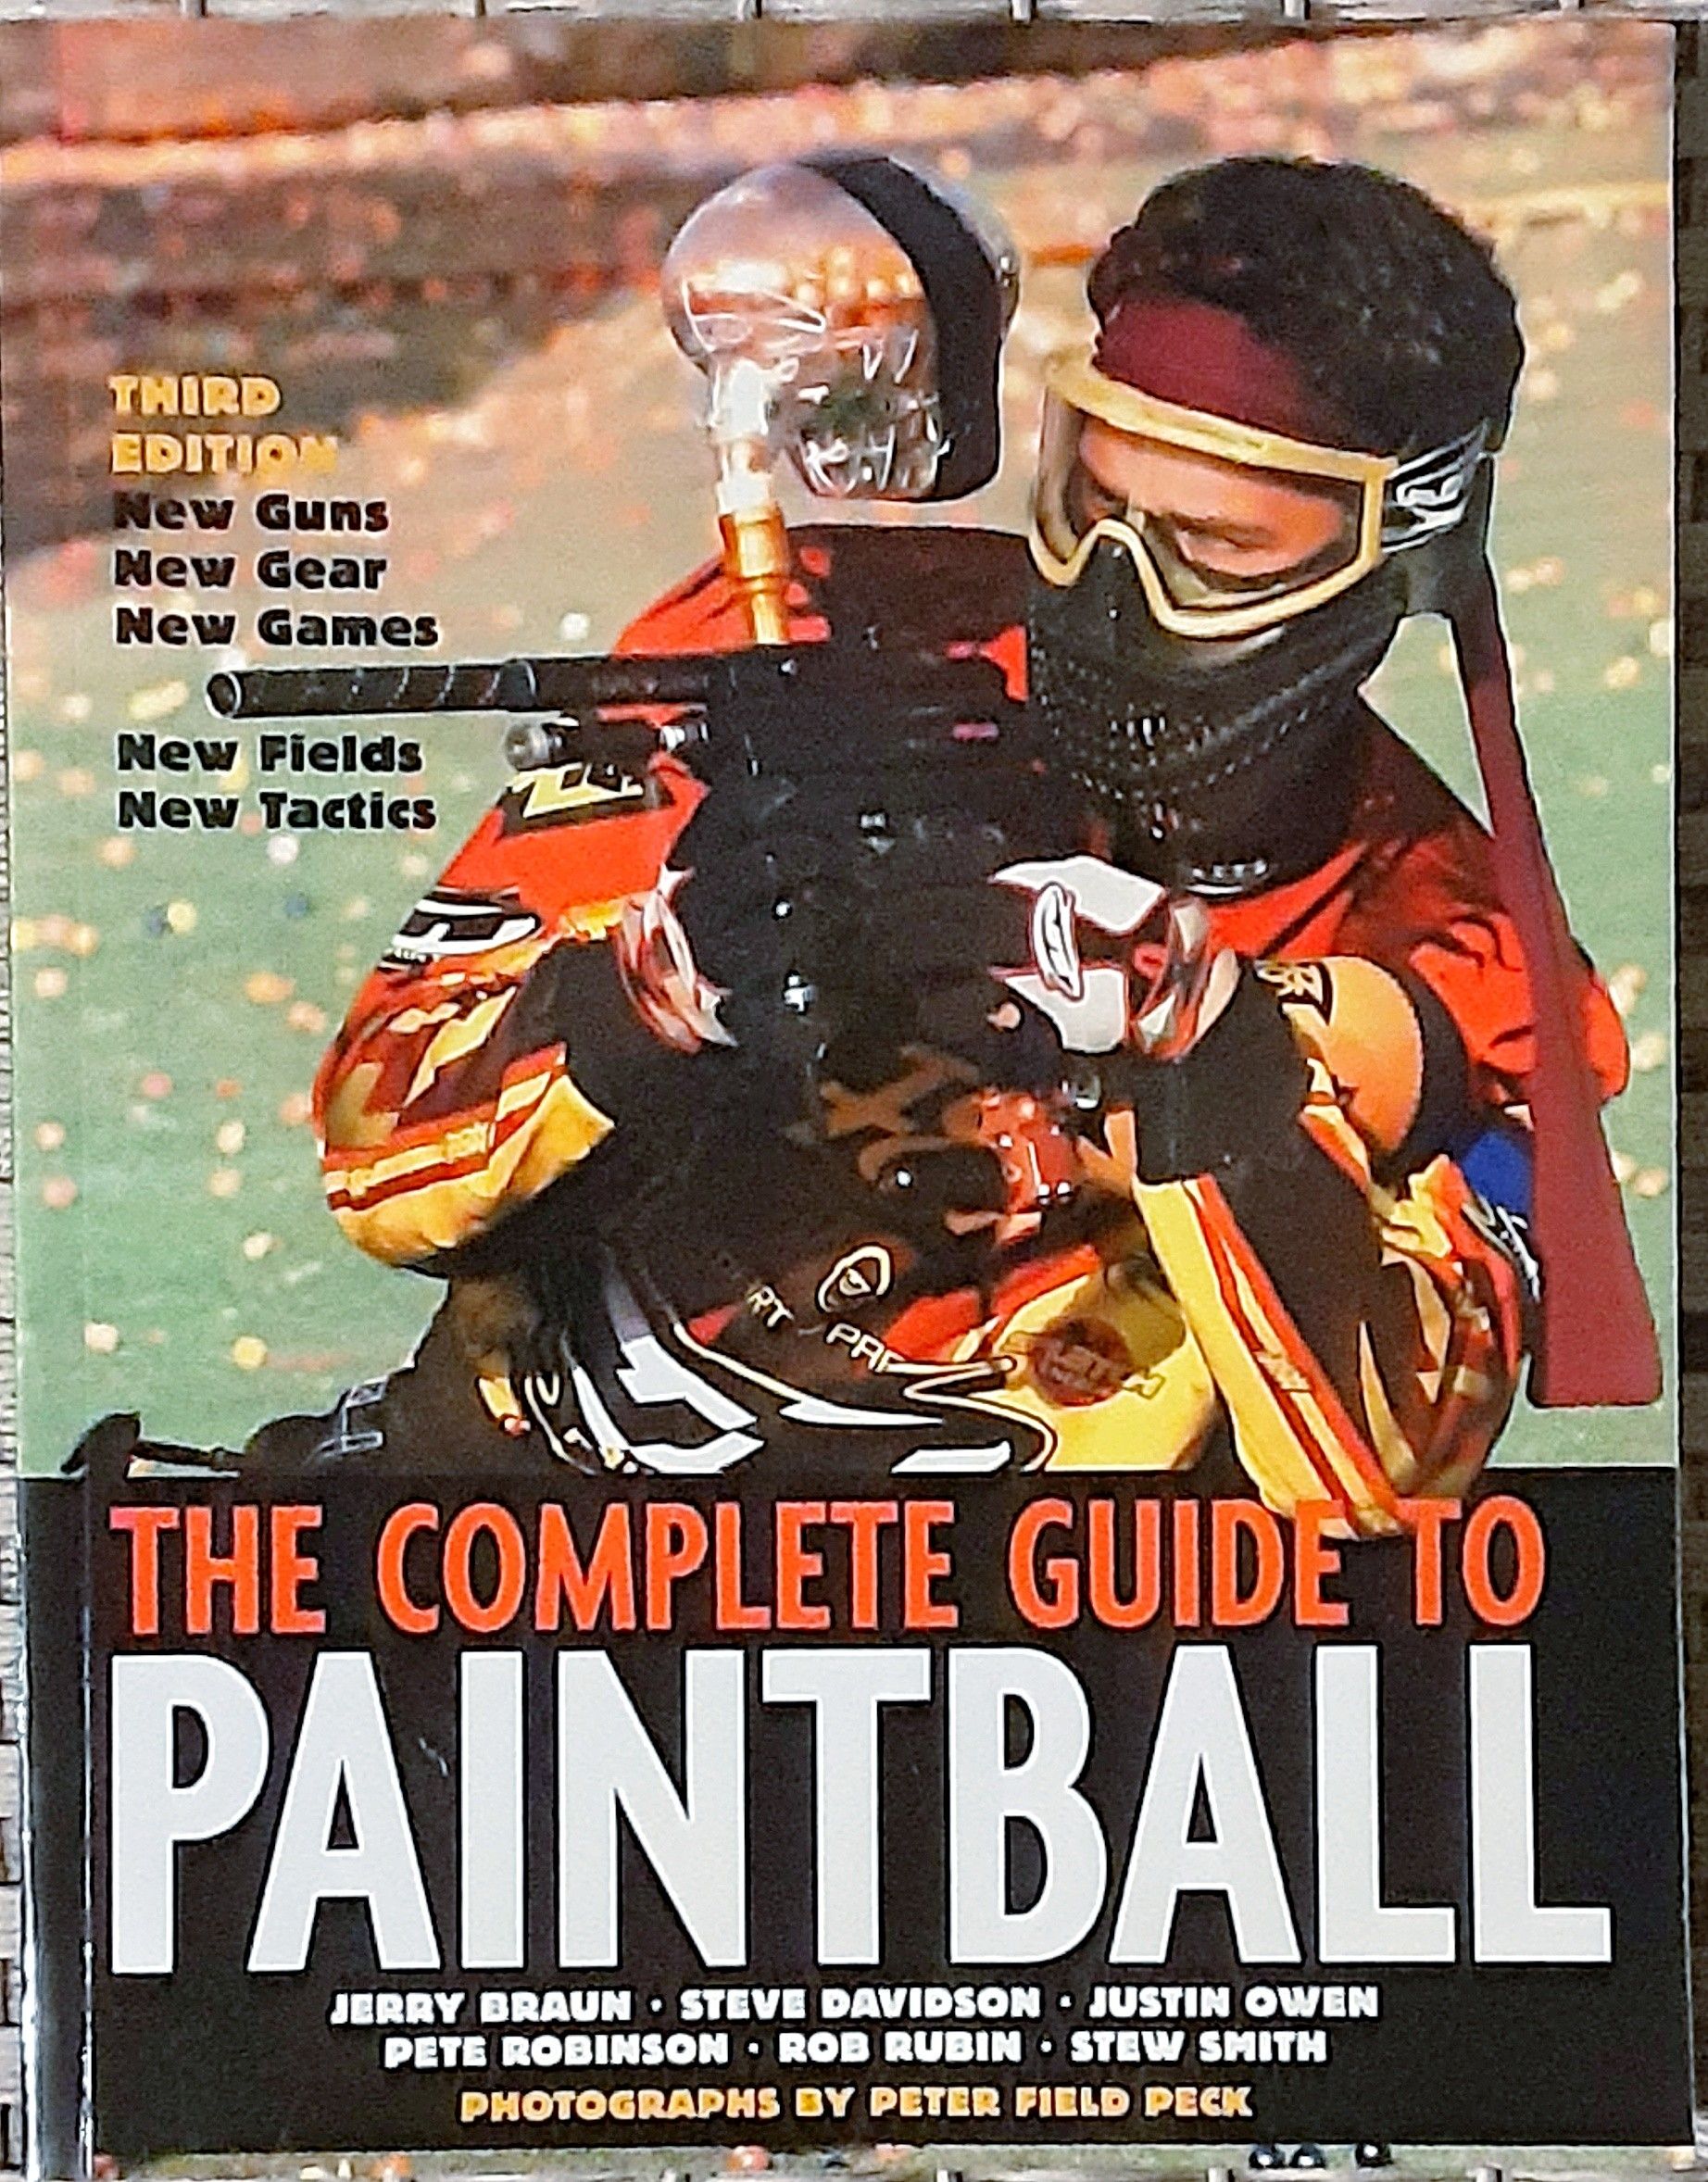 2004 copyright ....... paintball book or guide ! Vintage !